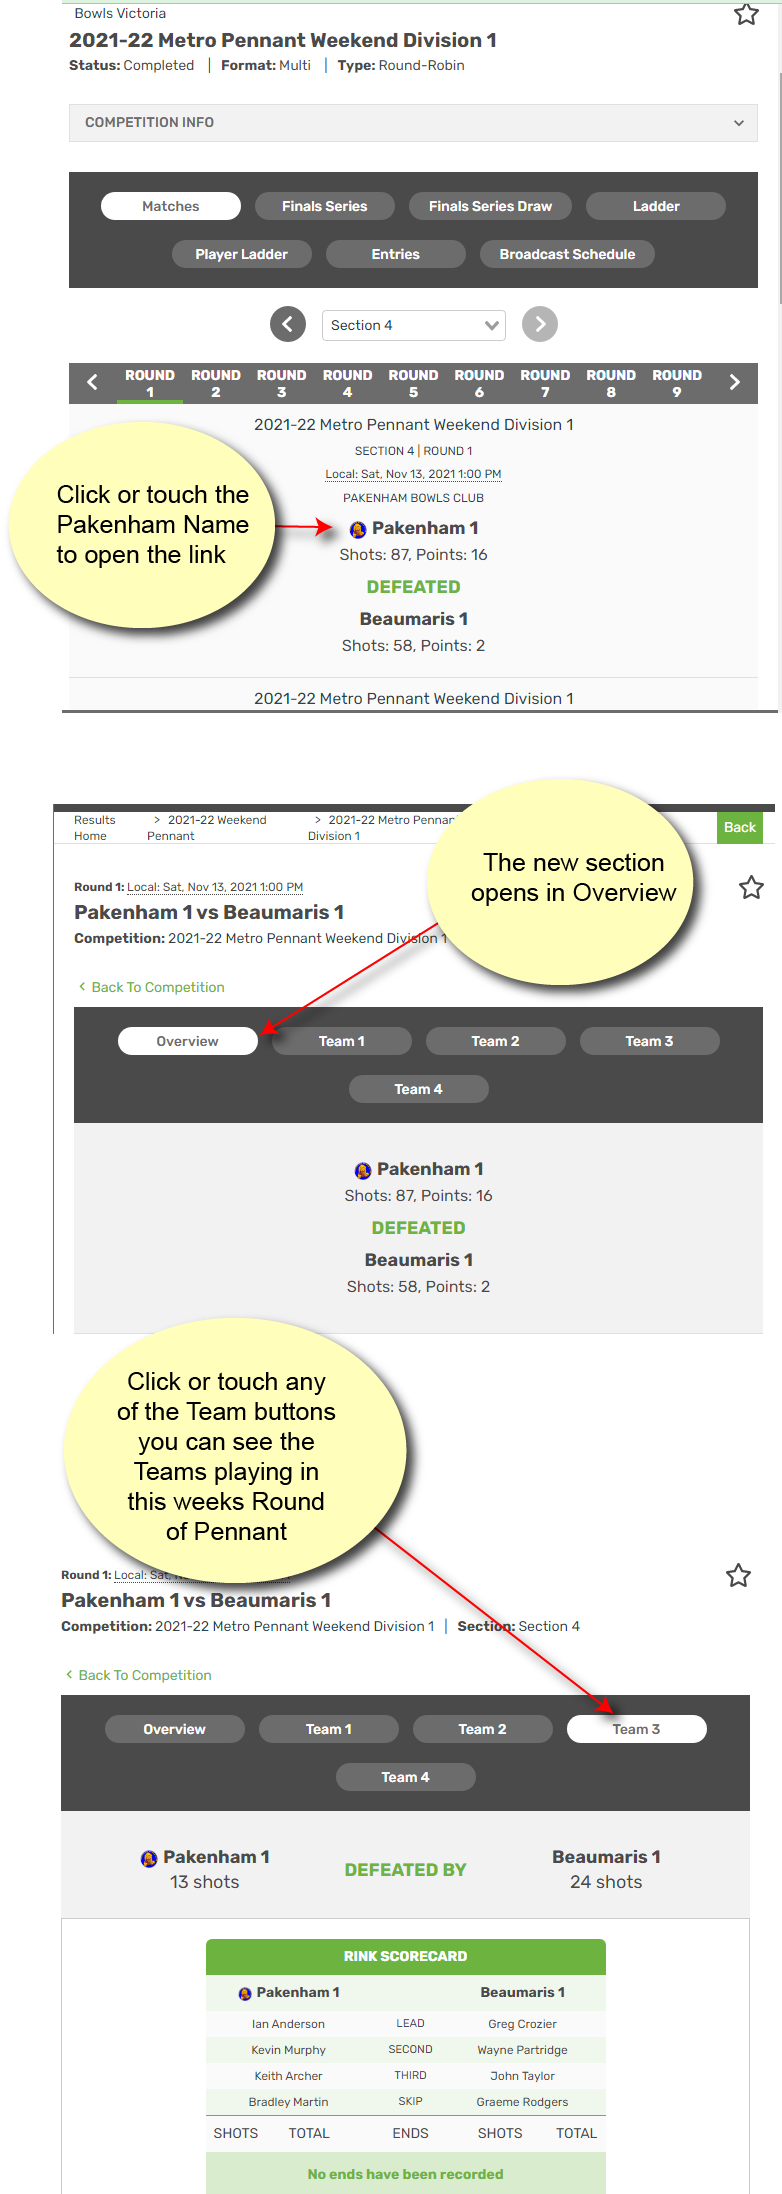 The image takes you through the steps to look at the teams for your club. You get there by choosing your Club name, a new section open in overview mode. Team 1 through to four buttons are on the screen. If you chose any of the team buttons it will open the team names for both Teams playing against each other.